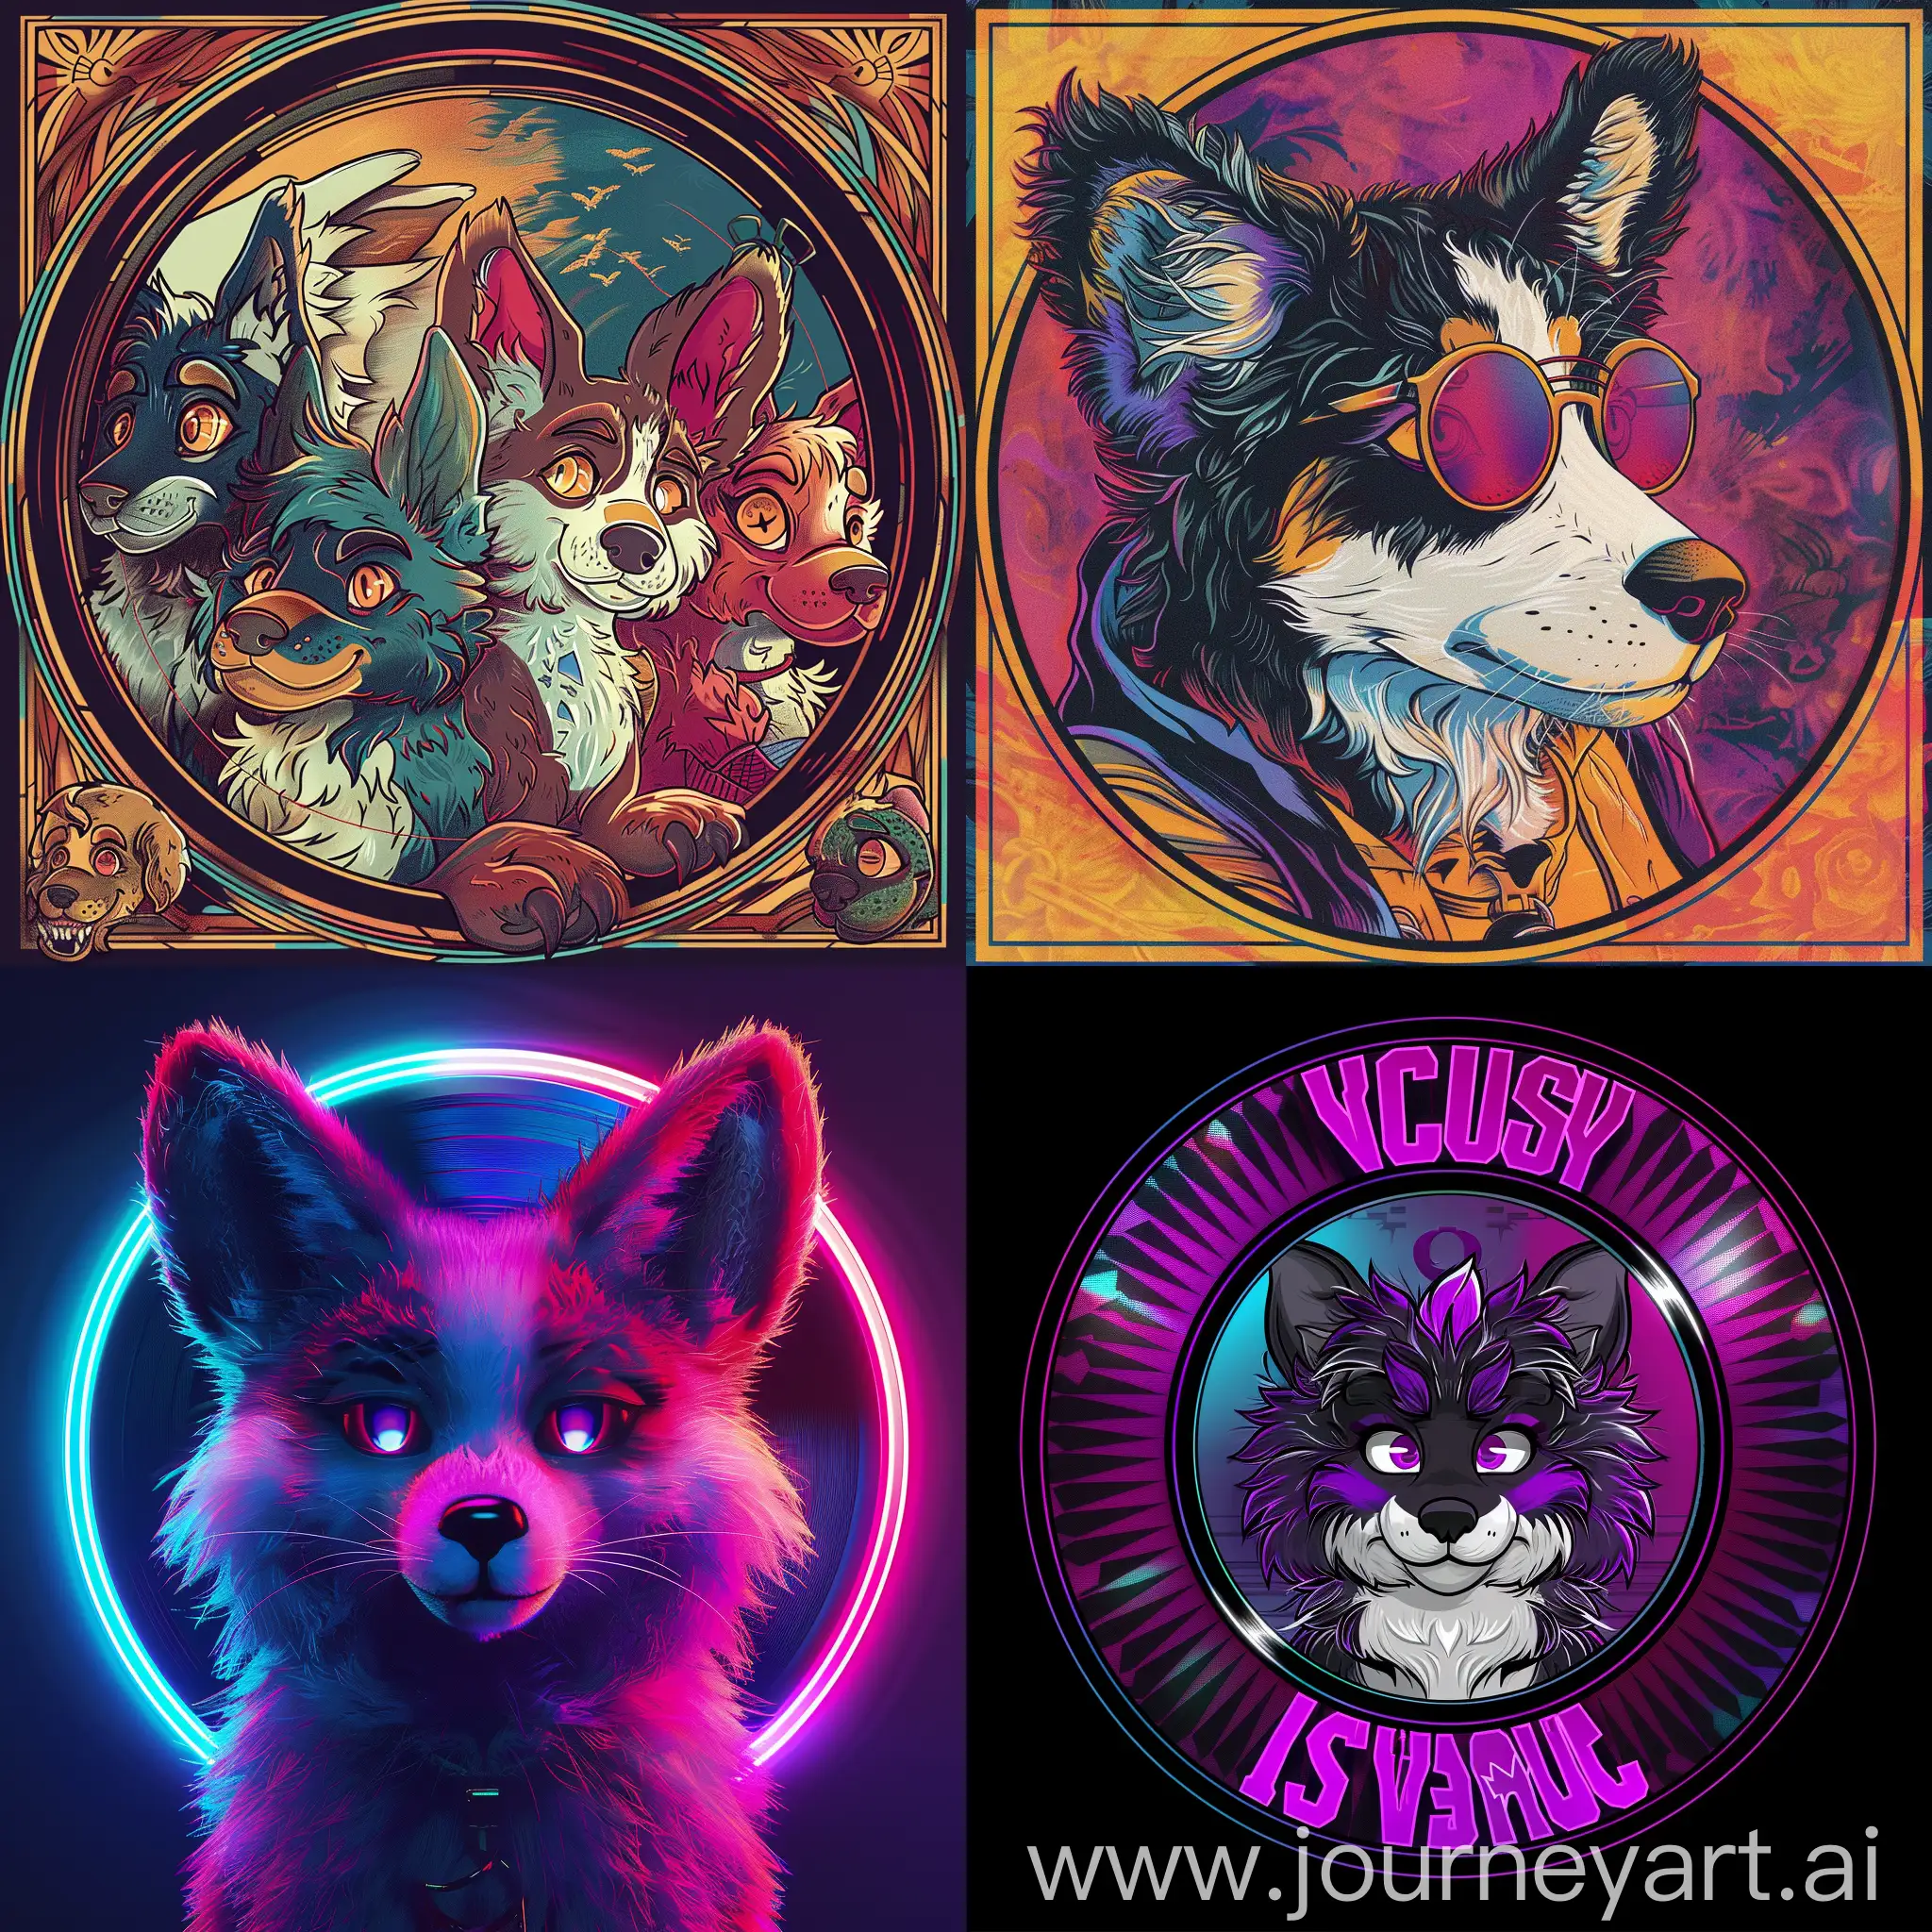 CD art cover in the style of "furries in a blender"